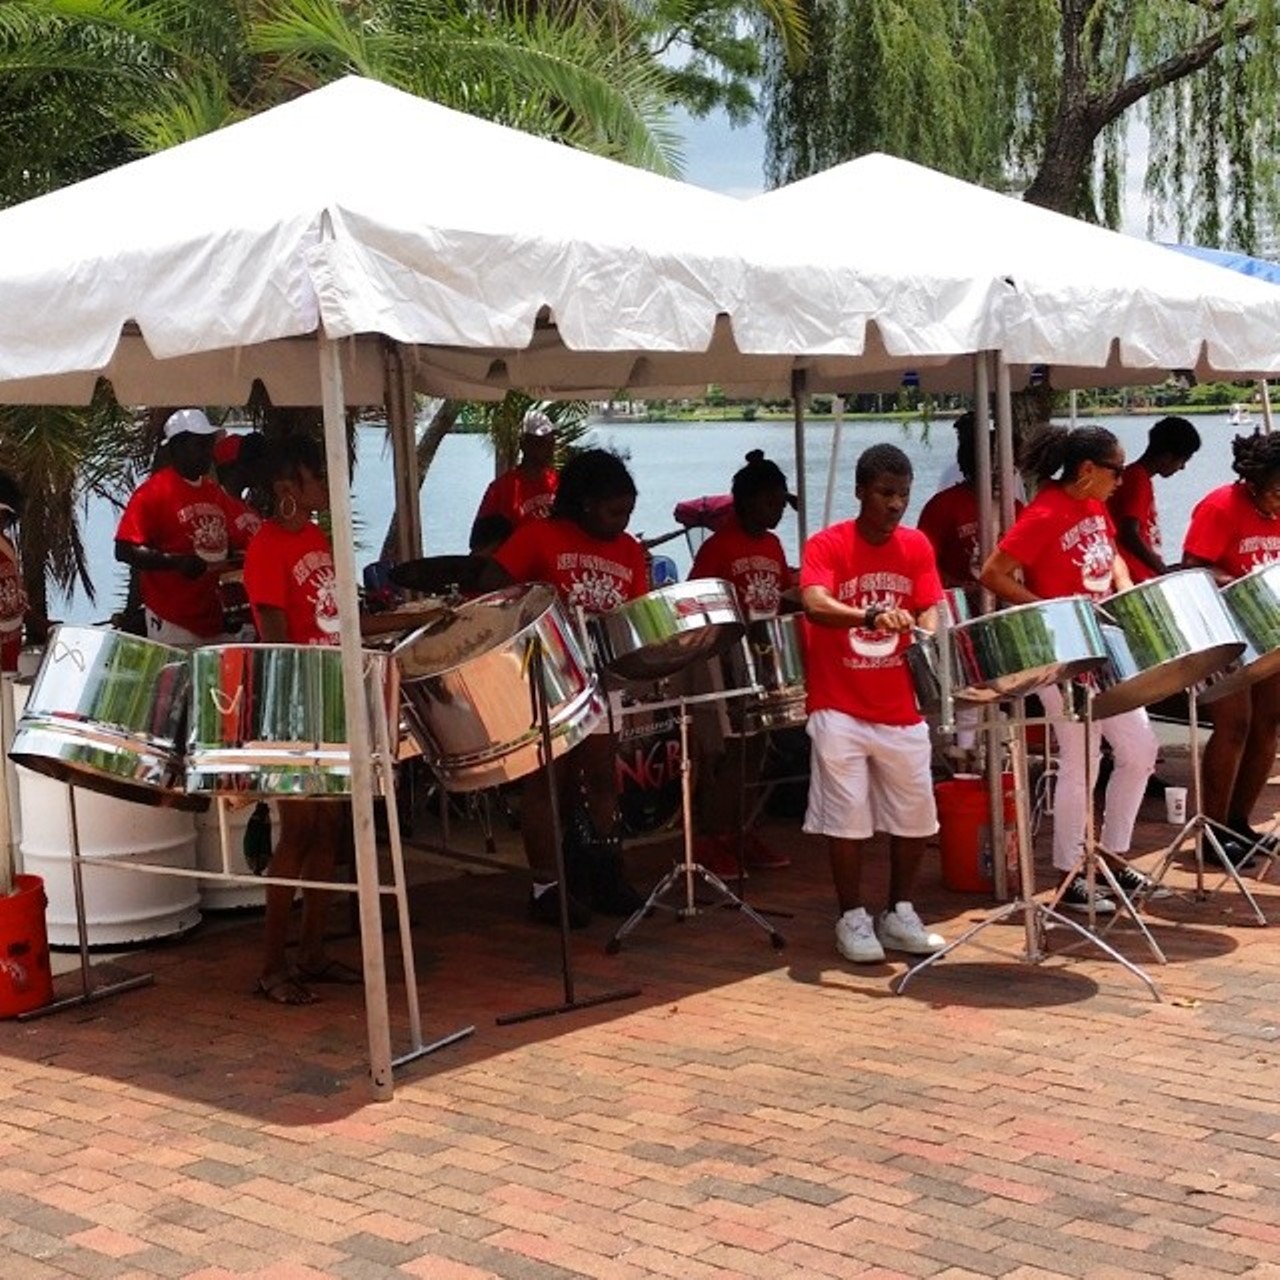 Caribbean Heritage Festival
750 S. Alabama Ave. Deland, July 24, 2-8 p.m.
This is a free event by Volusia Heritage Festival celebrating Caribbean heritage and music. Bring the family to Earl Brown Park and listen to Soca and munch on traditional caribbean food. 
Photo via satellites407/Instagram